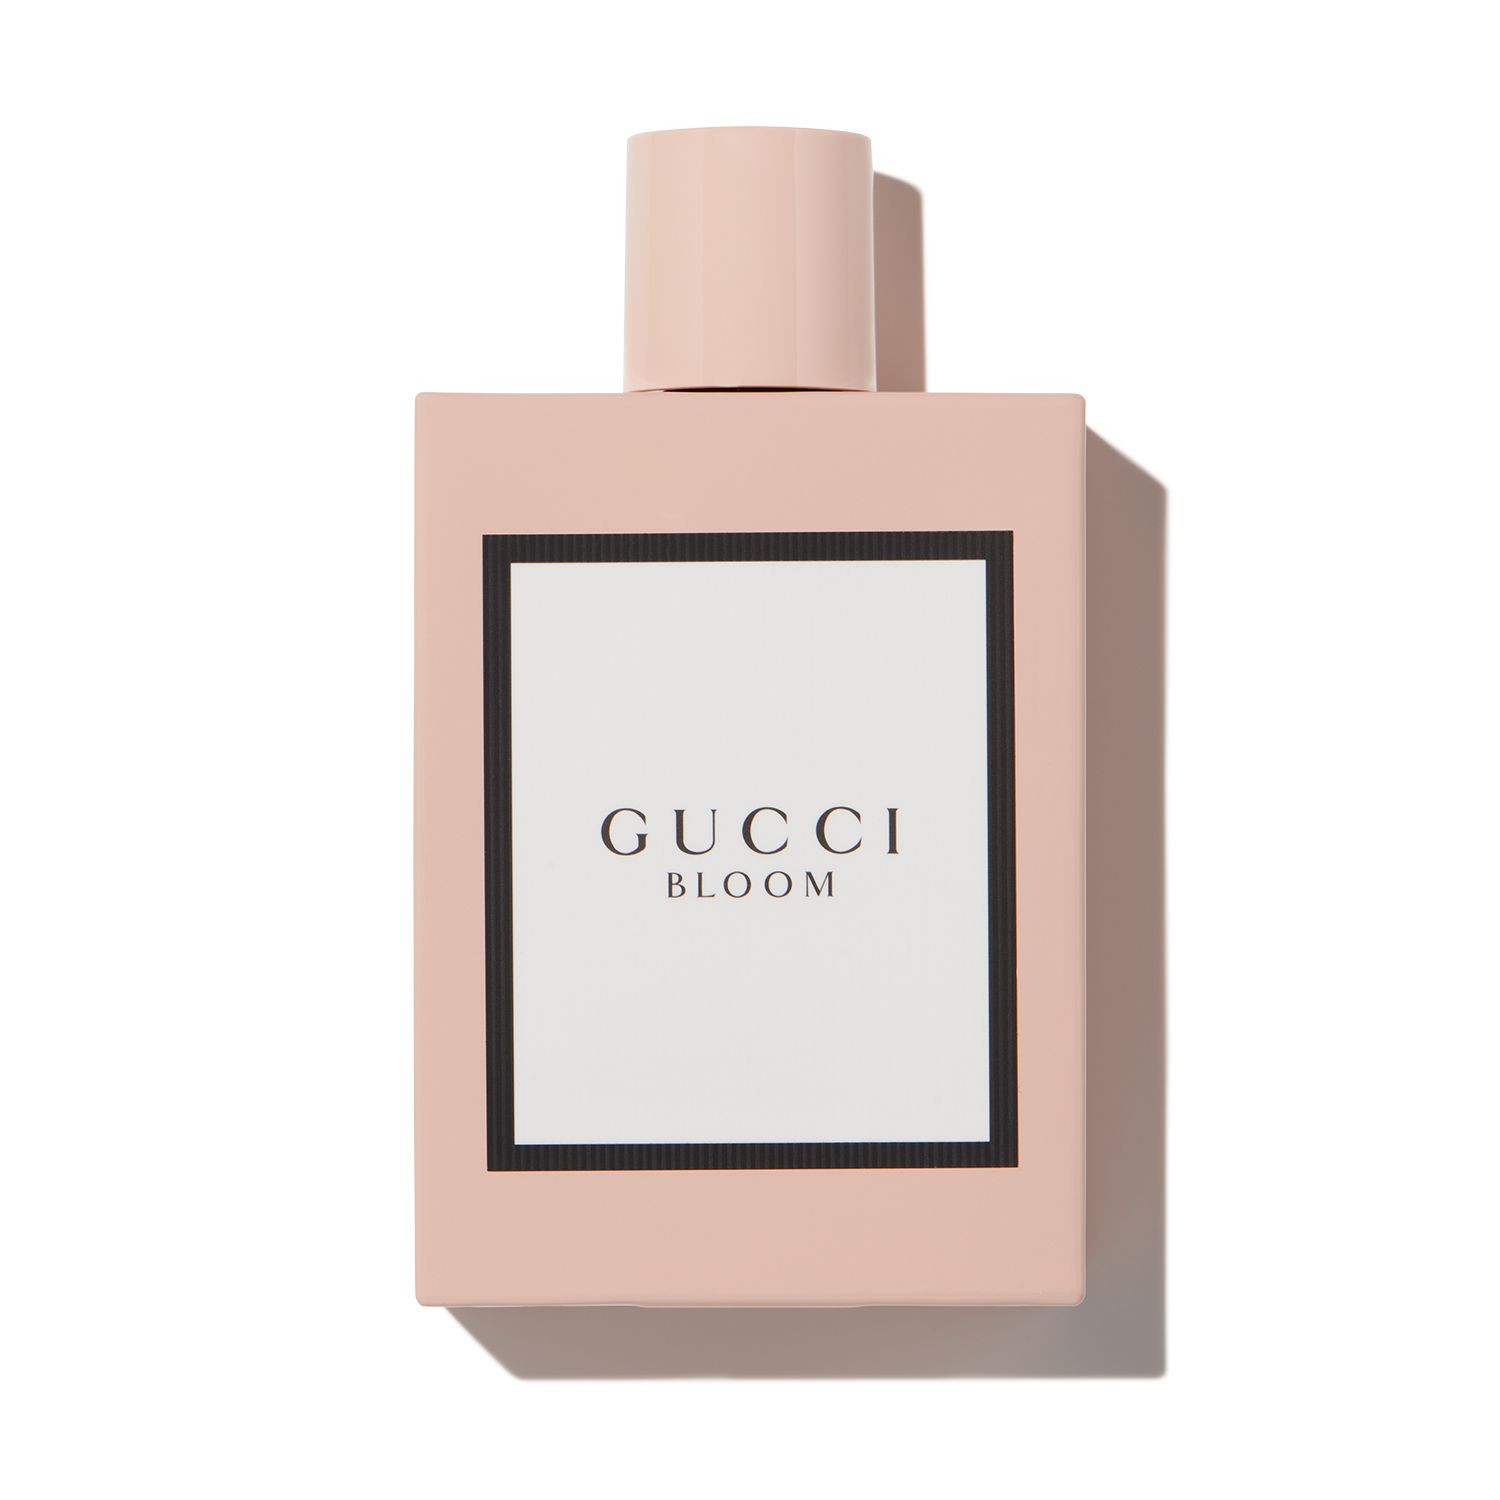 Gucci Bloom Perfume by Gucci